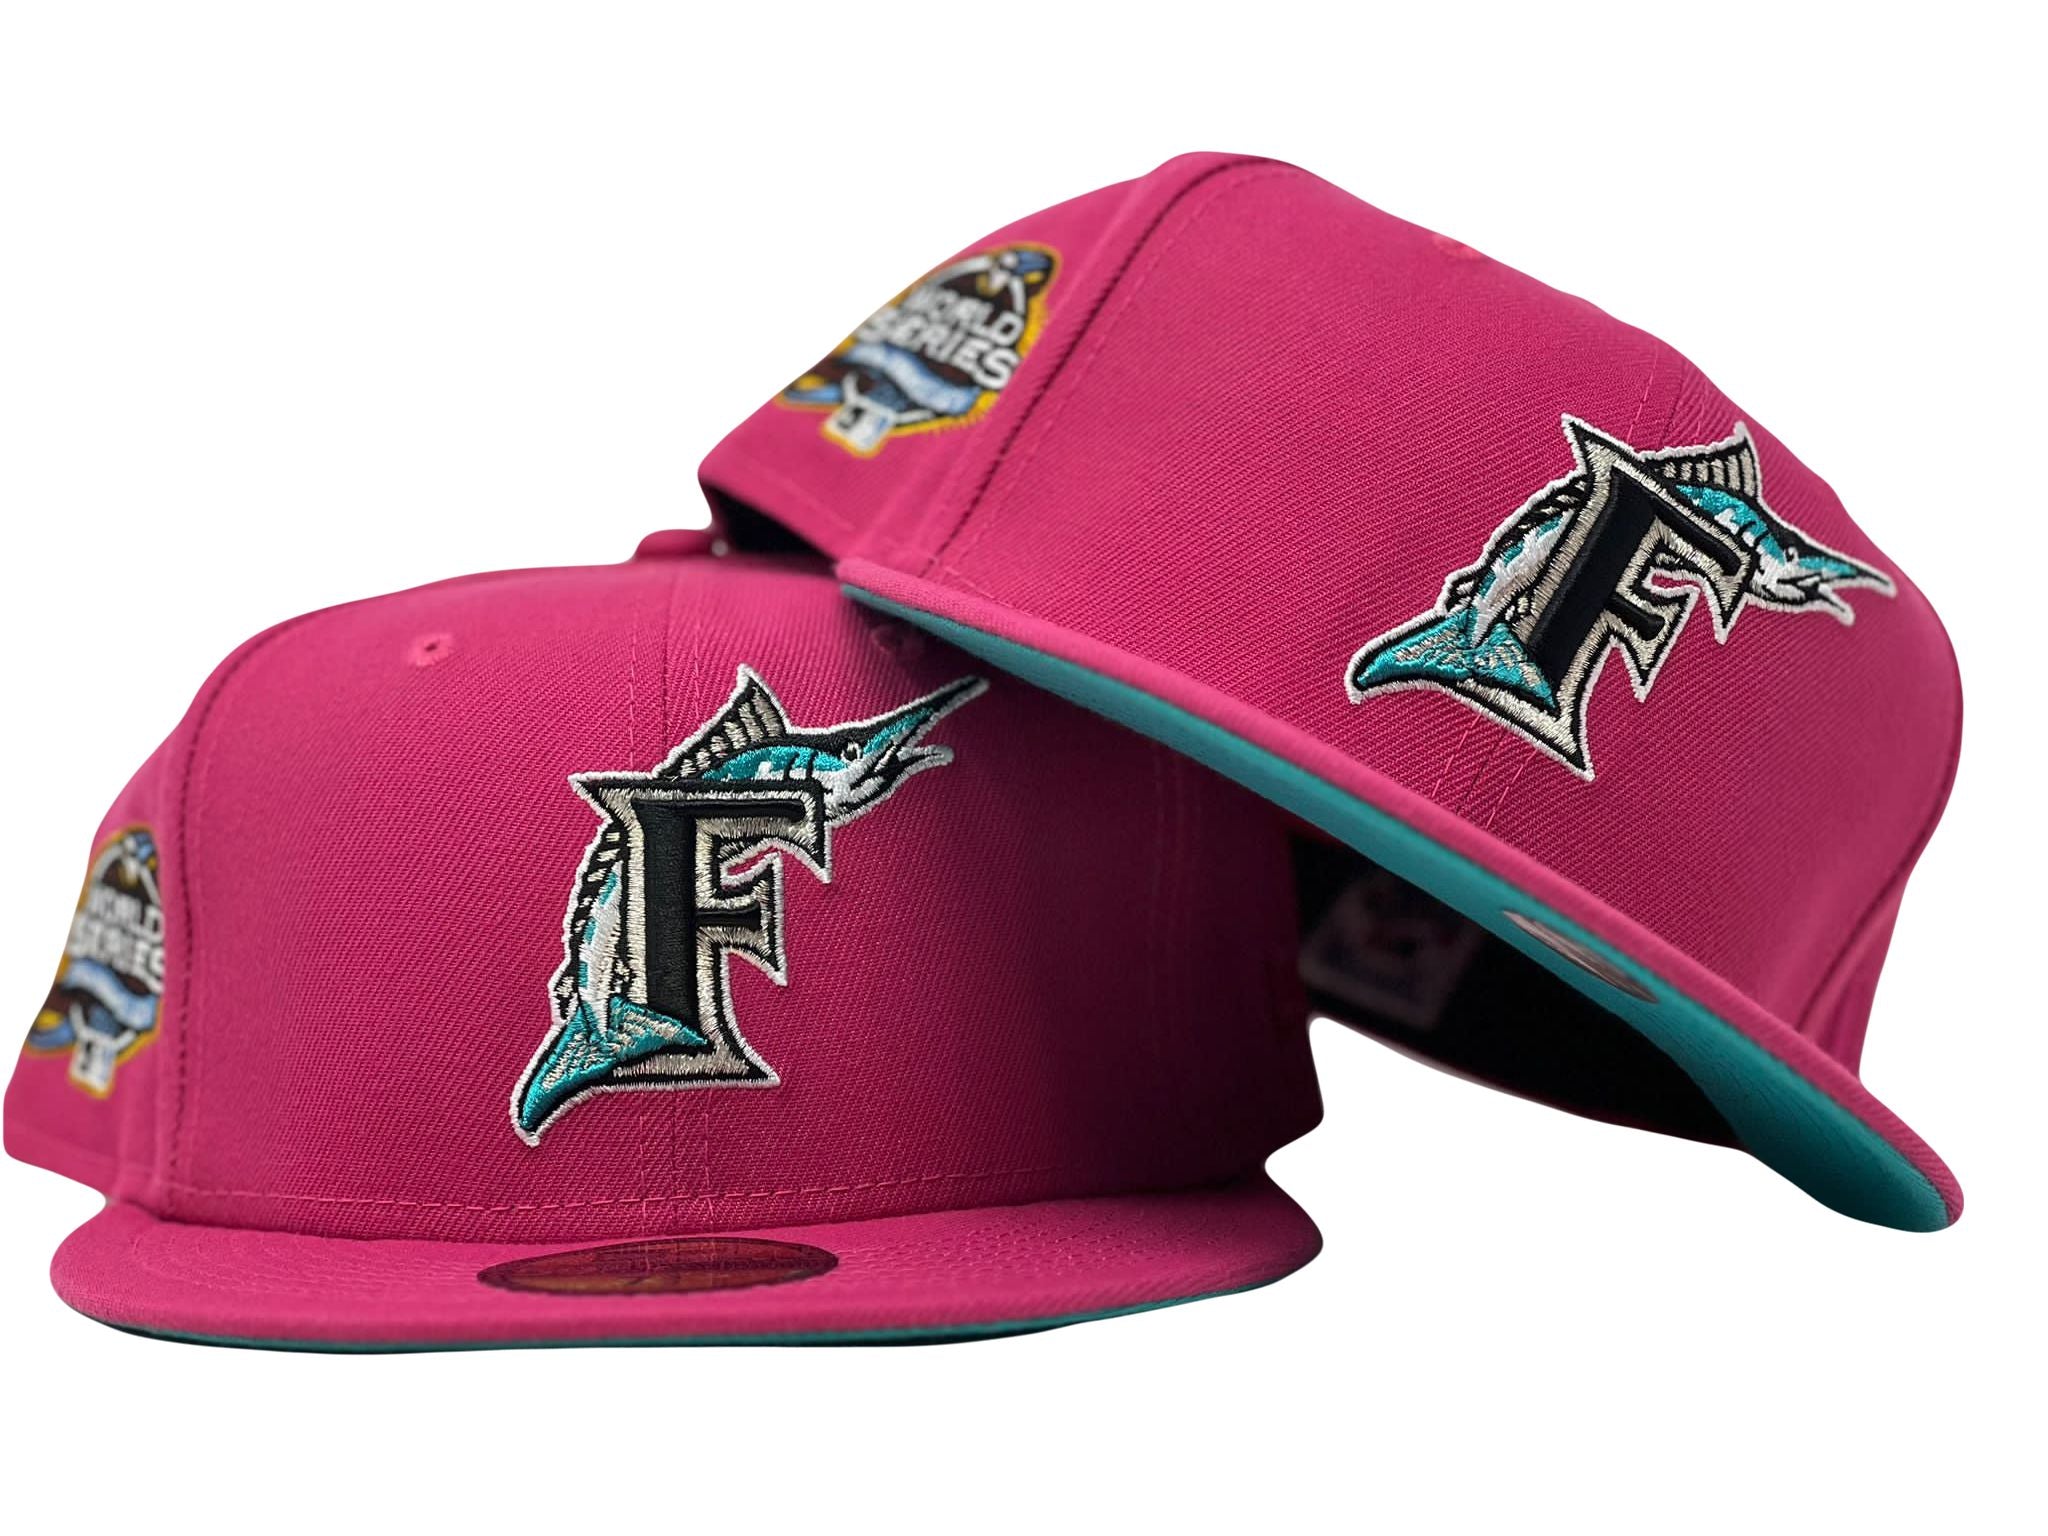 New Era Florida Marlins World Series 2003 Pinstripe Heroes Elite Edition 59FIFTY Fitted Hat